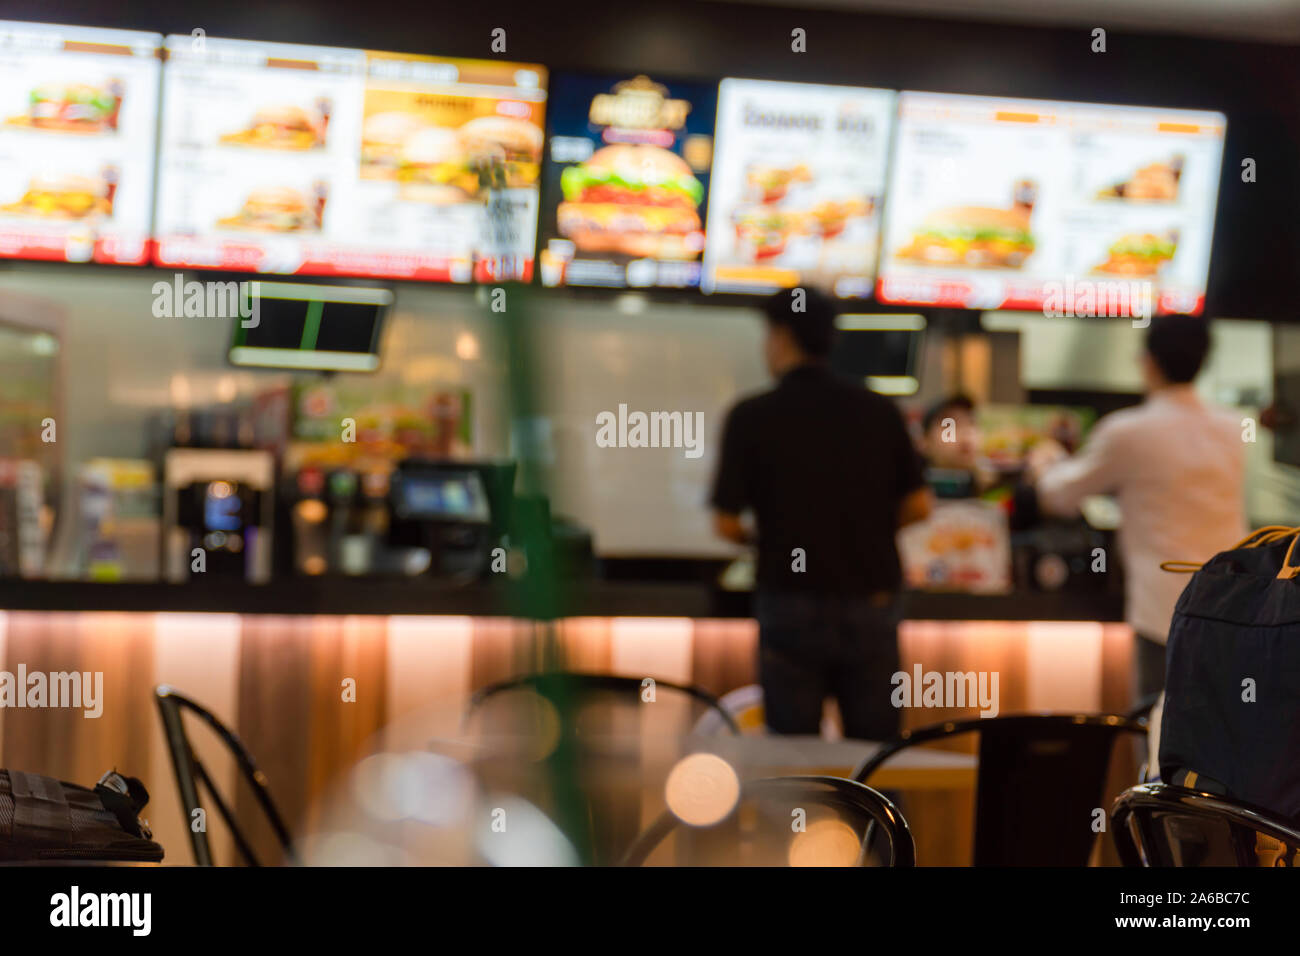 Quick Service Restaurant High Resolution Stock Photography and Images